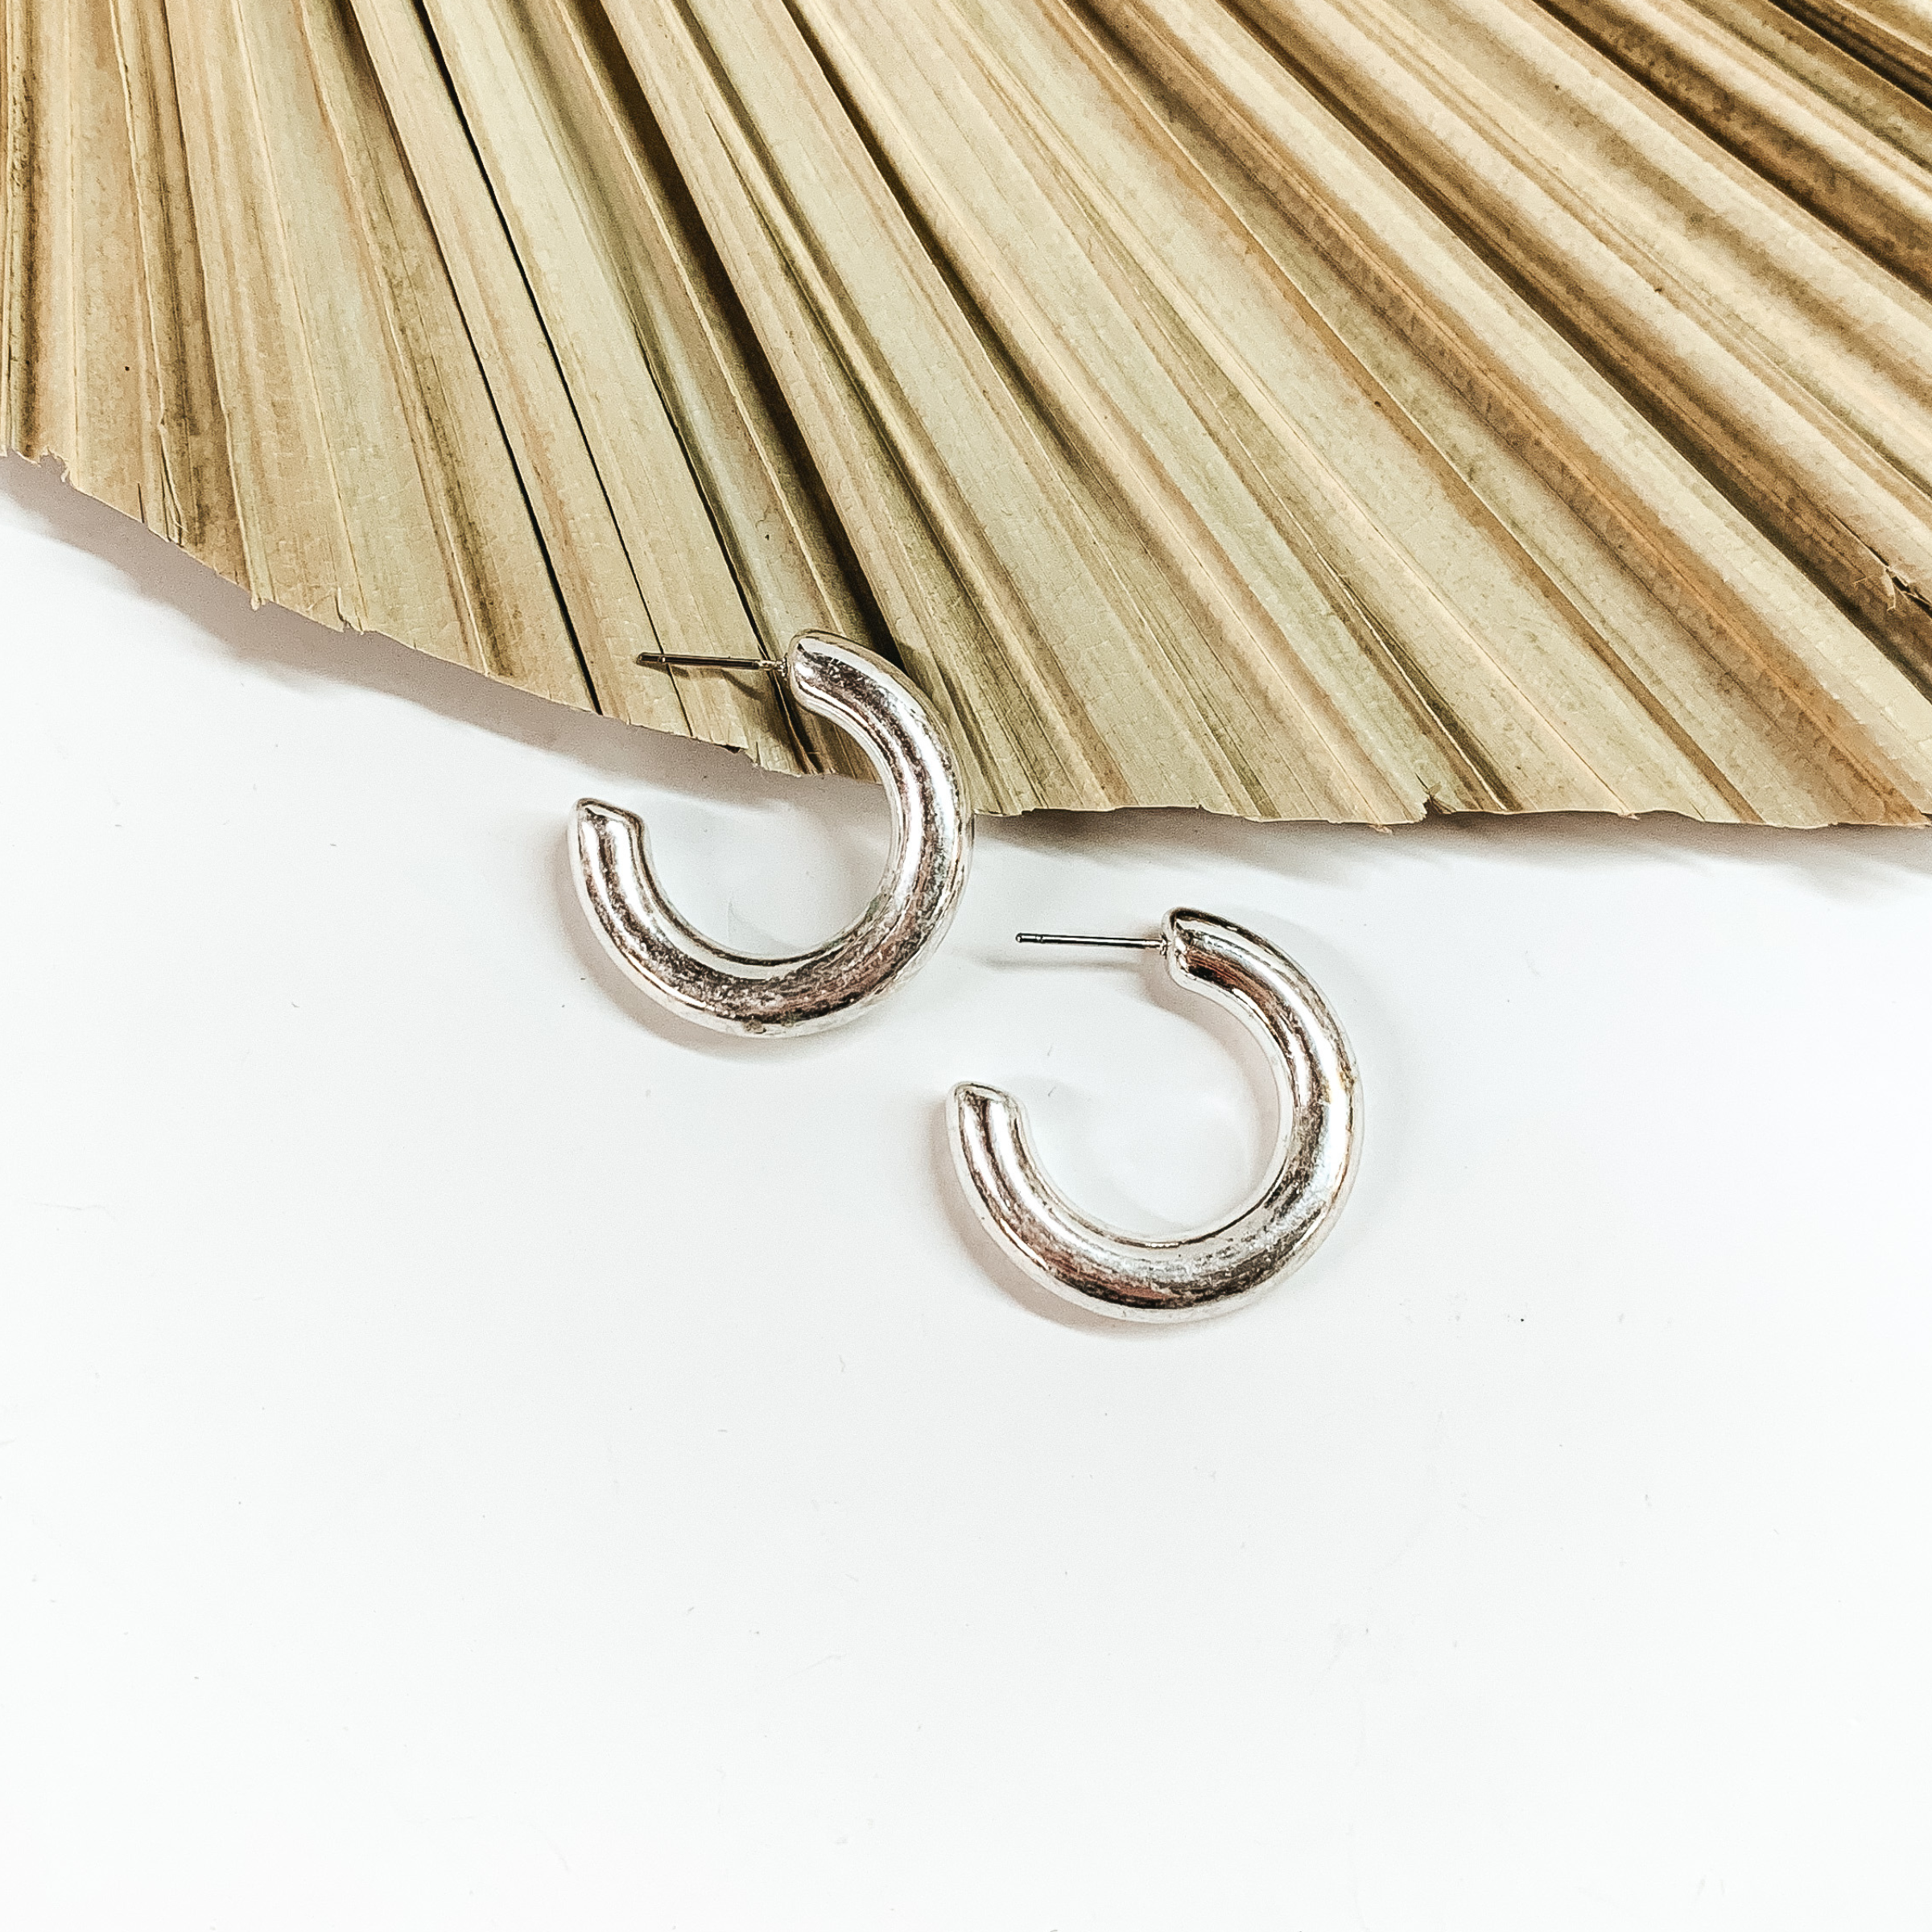 Clean Slate Small Hoop Earrings in Worn Silver Tone - Giddy Up Glamour Boutique